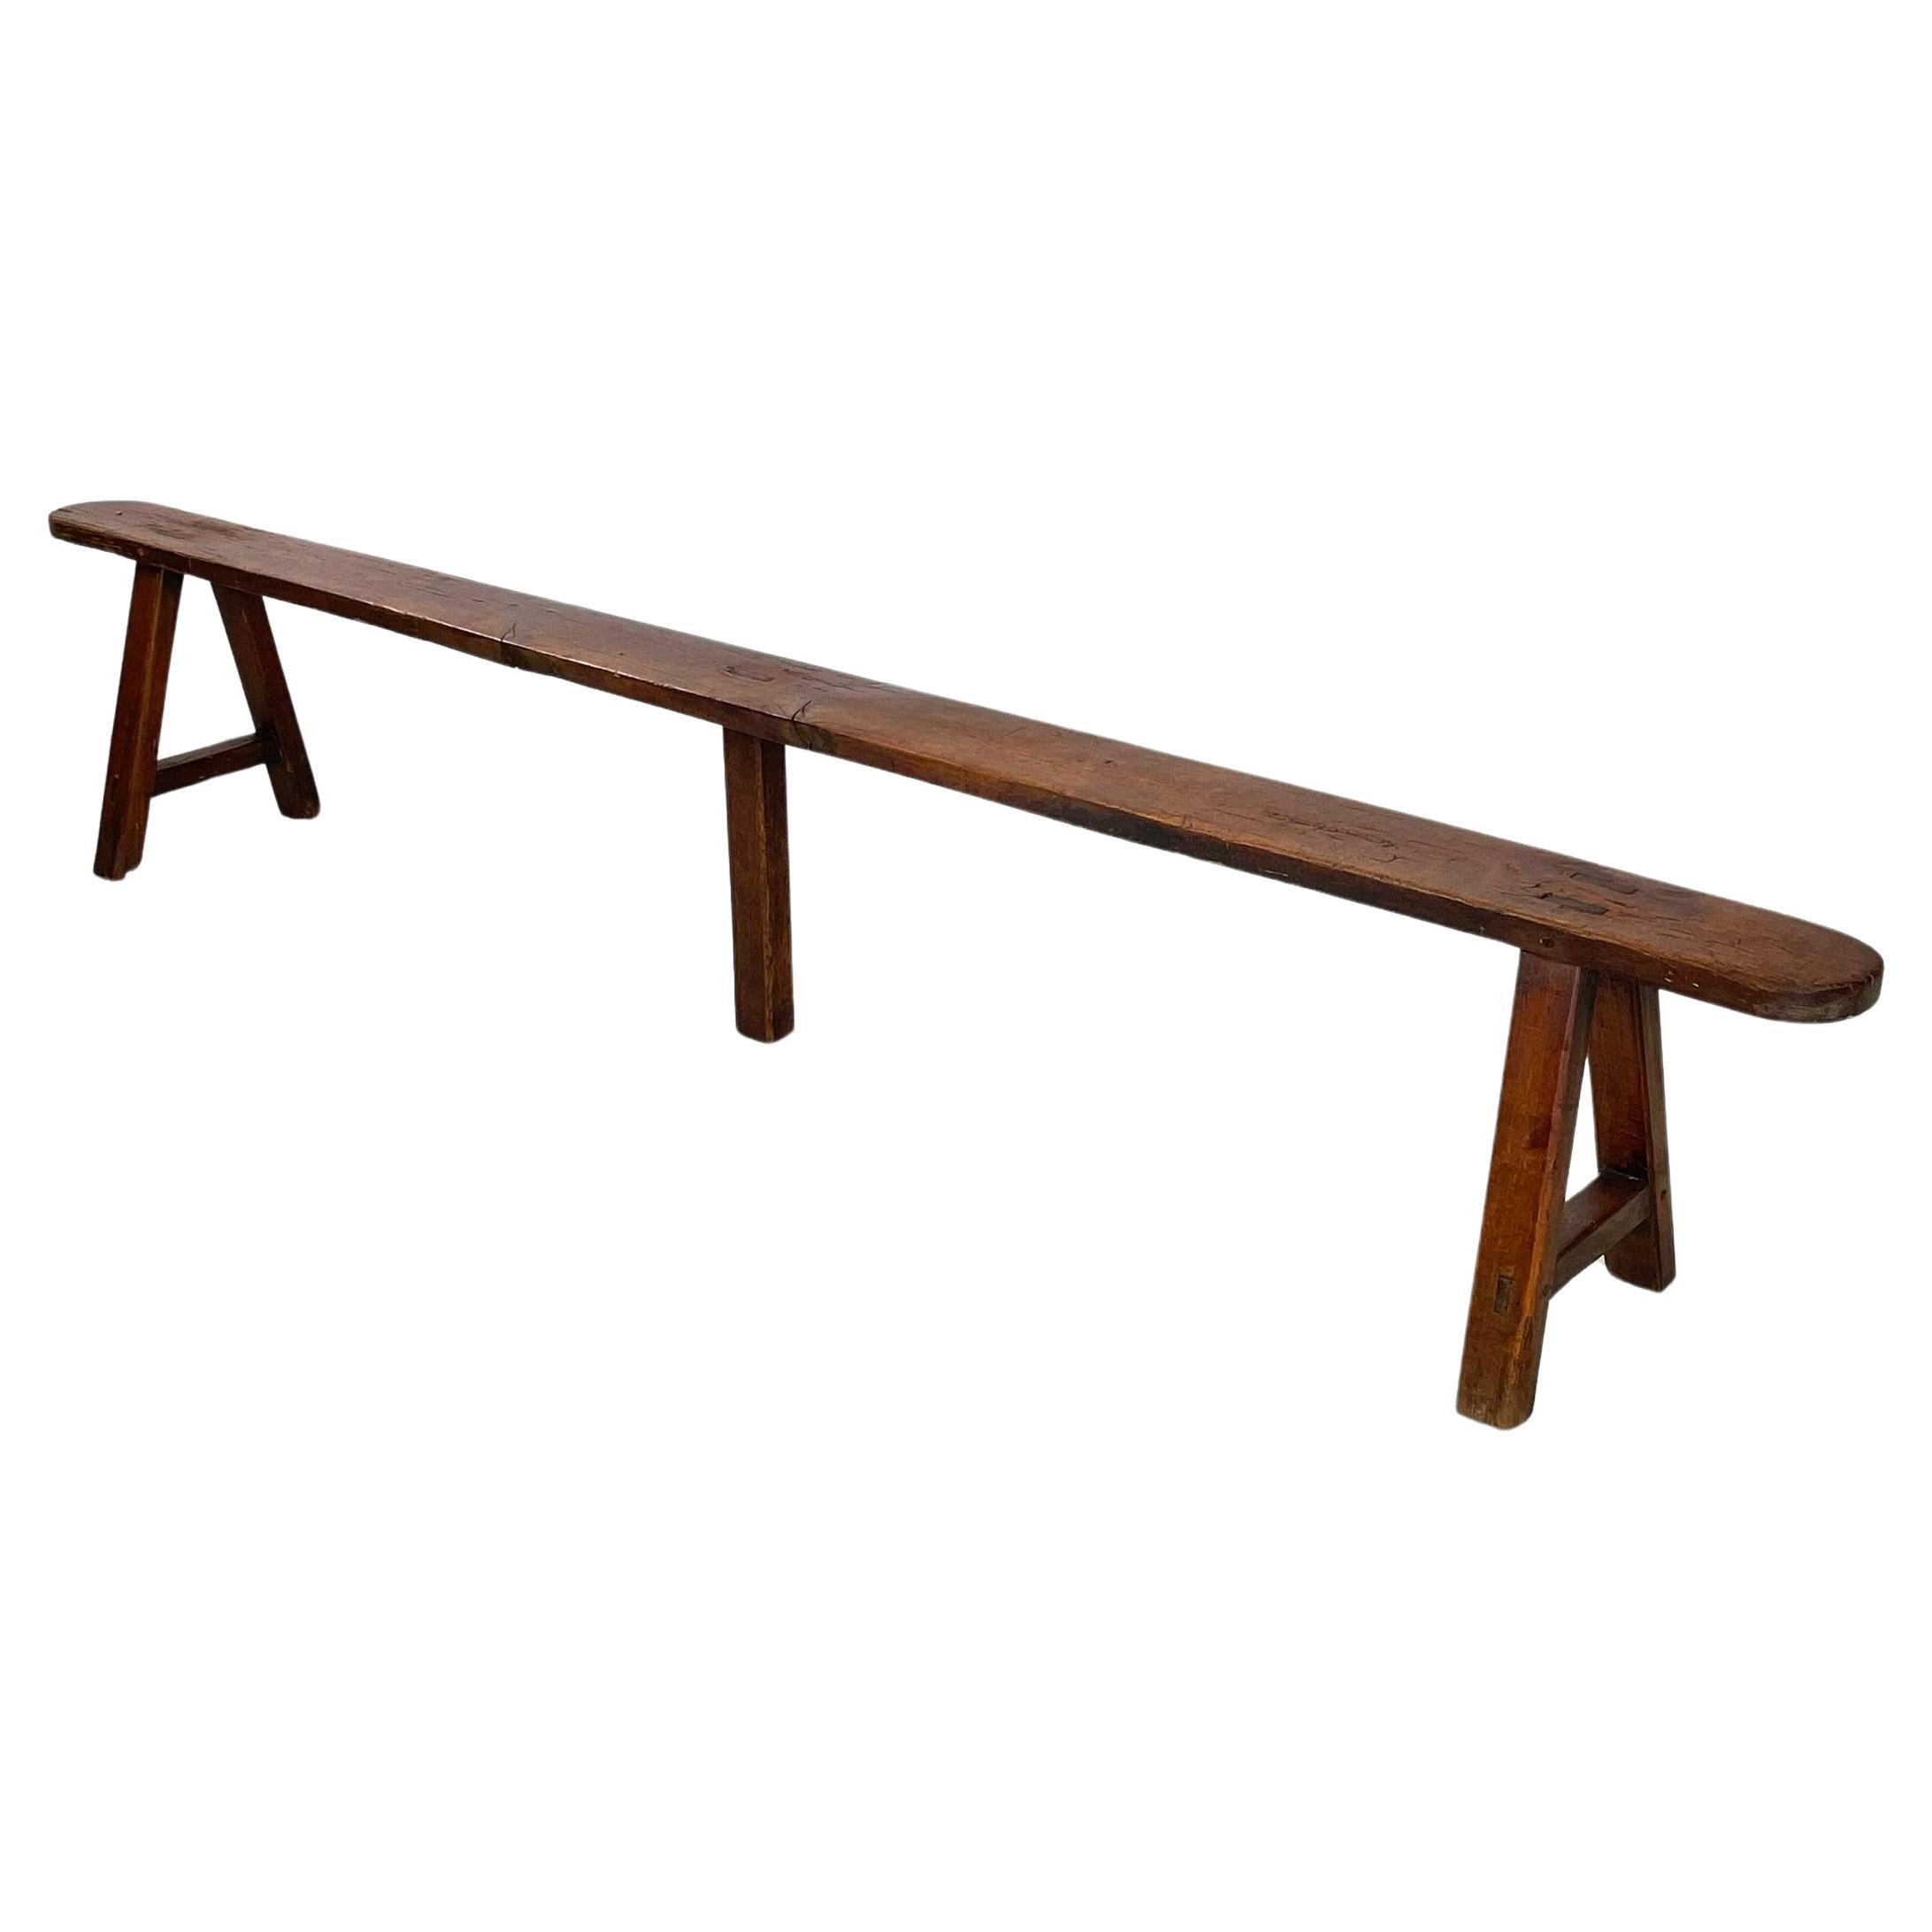 French mid-century Wooden bench with narrow and long seat, 1930s